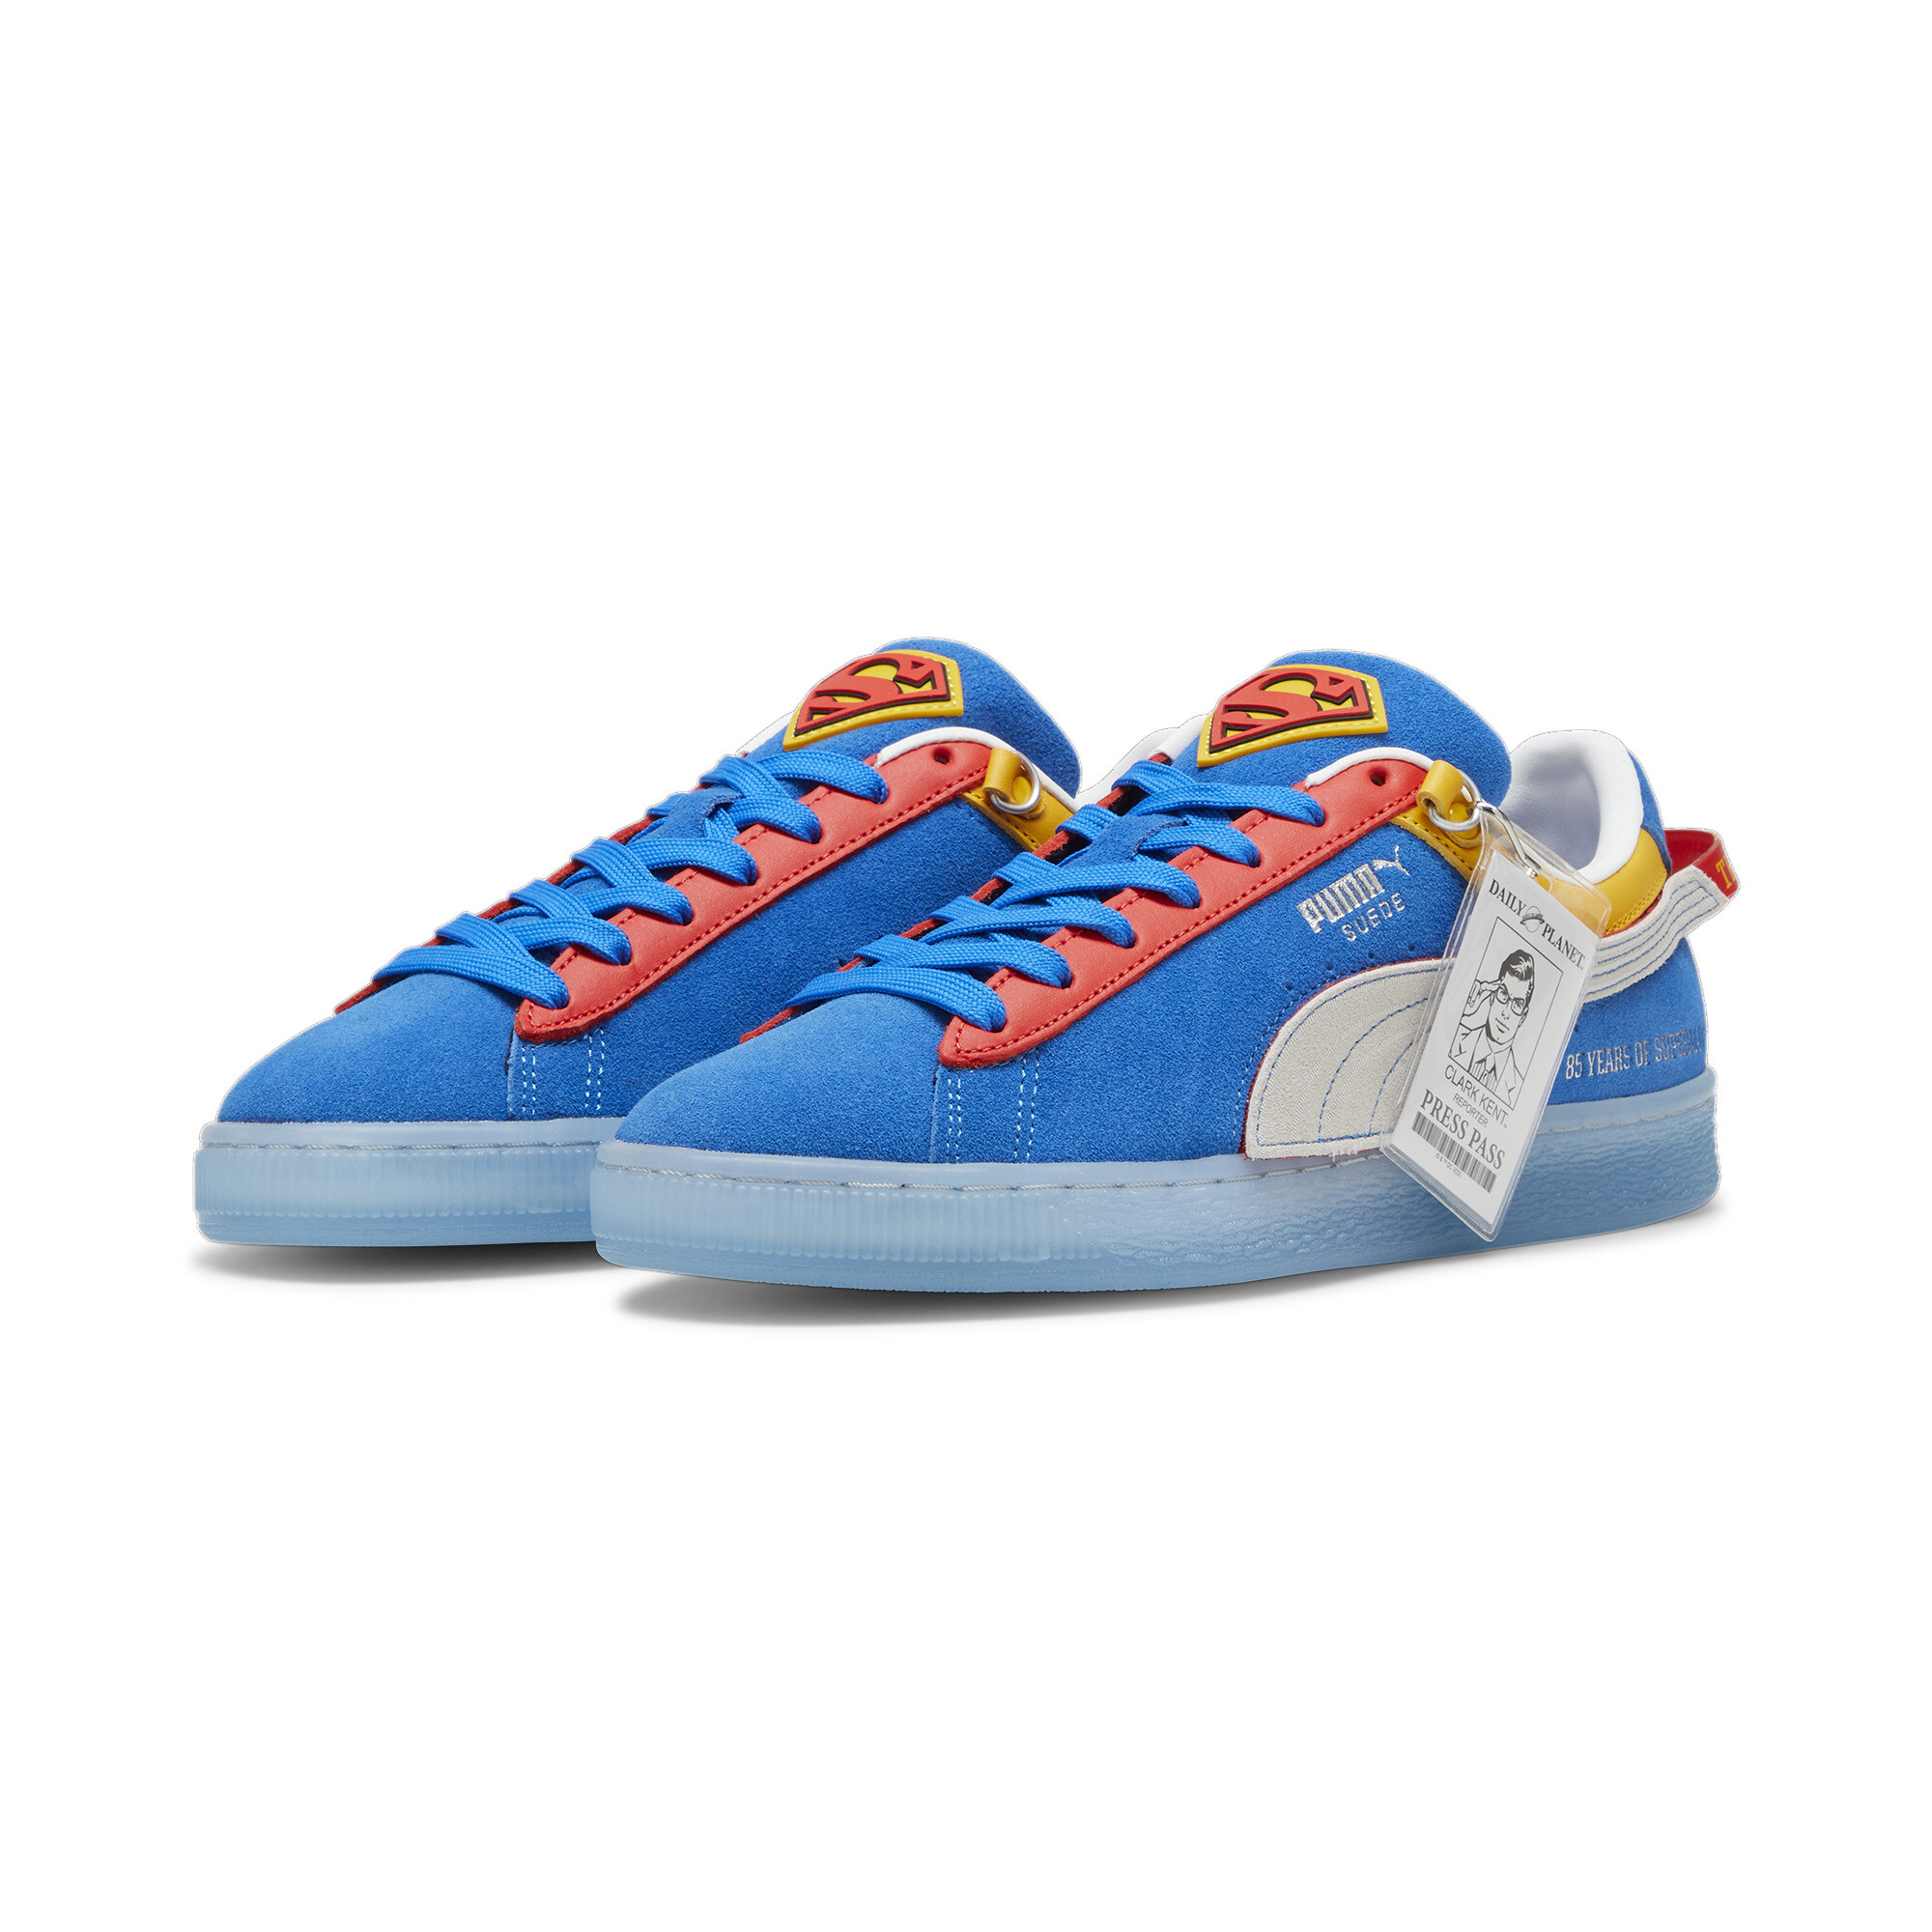 Puma X SUPERMAN 85th Anniversary Suede Sneakers, Blue, Size 37.5, Shoes